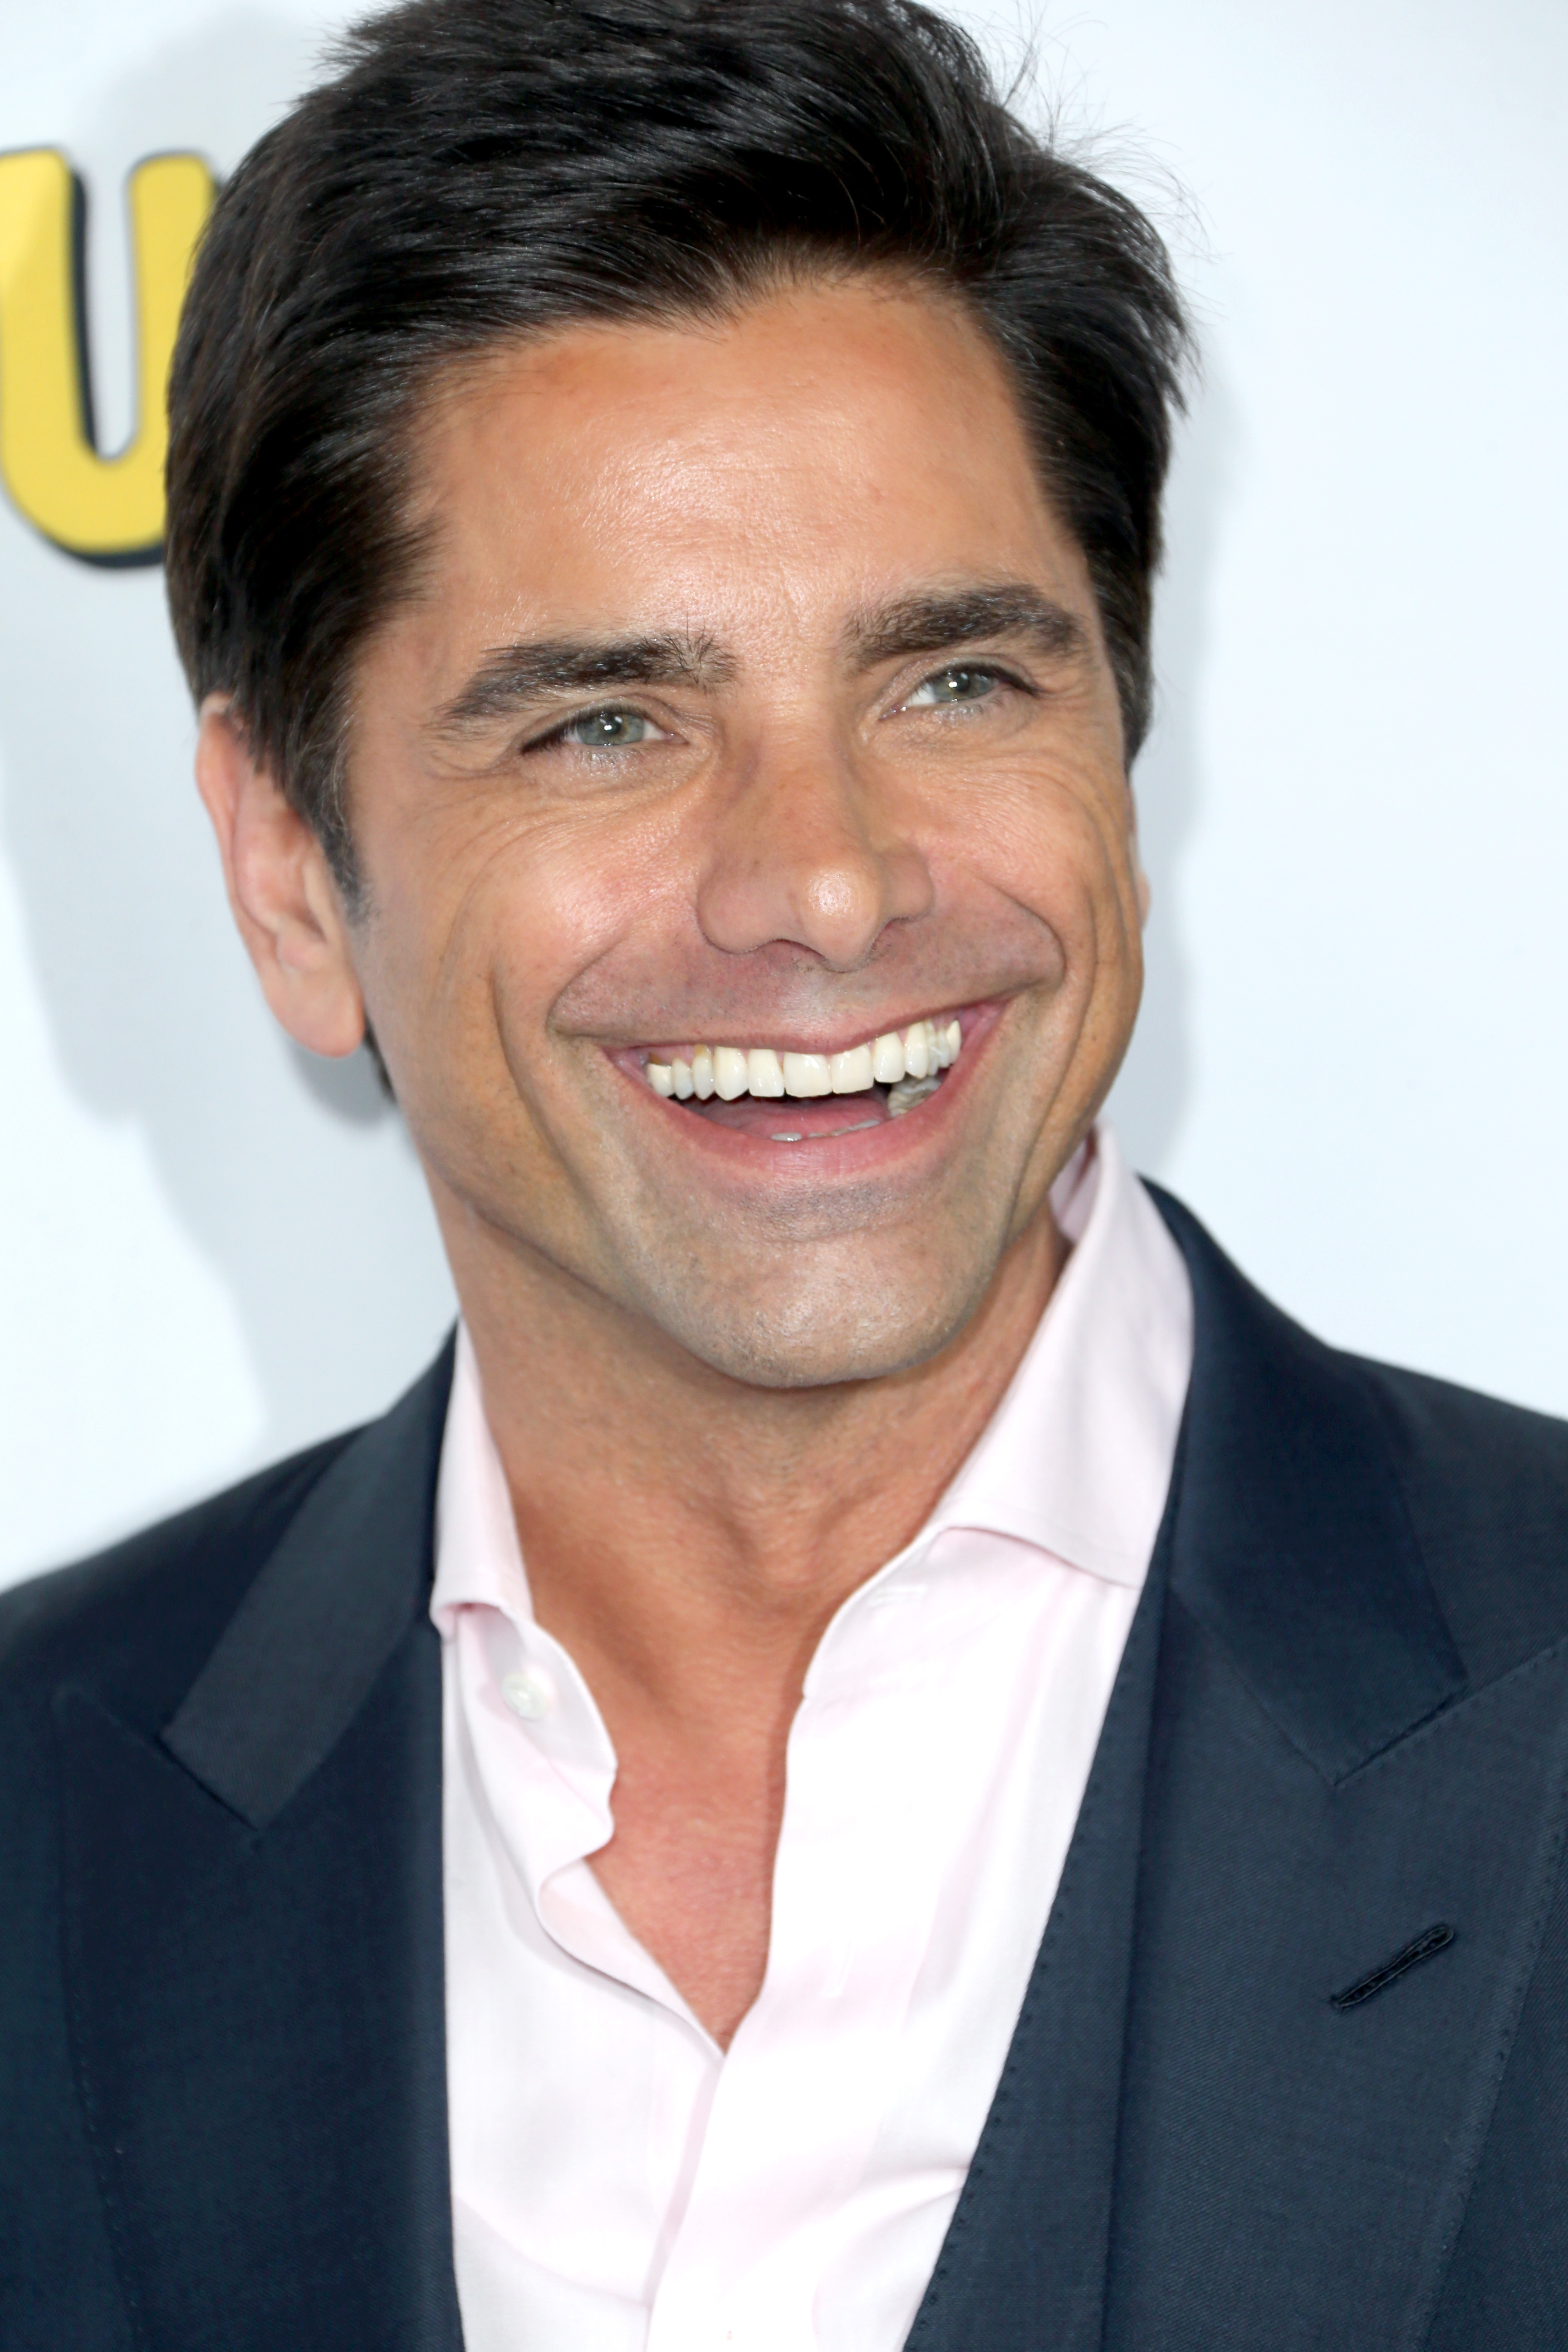 John Stamos Naming His Signature Sex Move Sounds Just Like Something